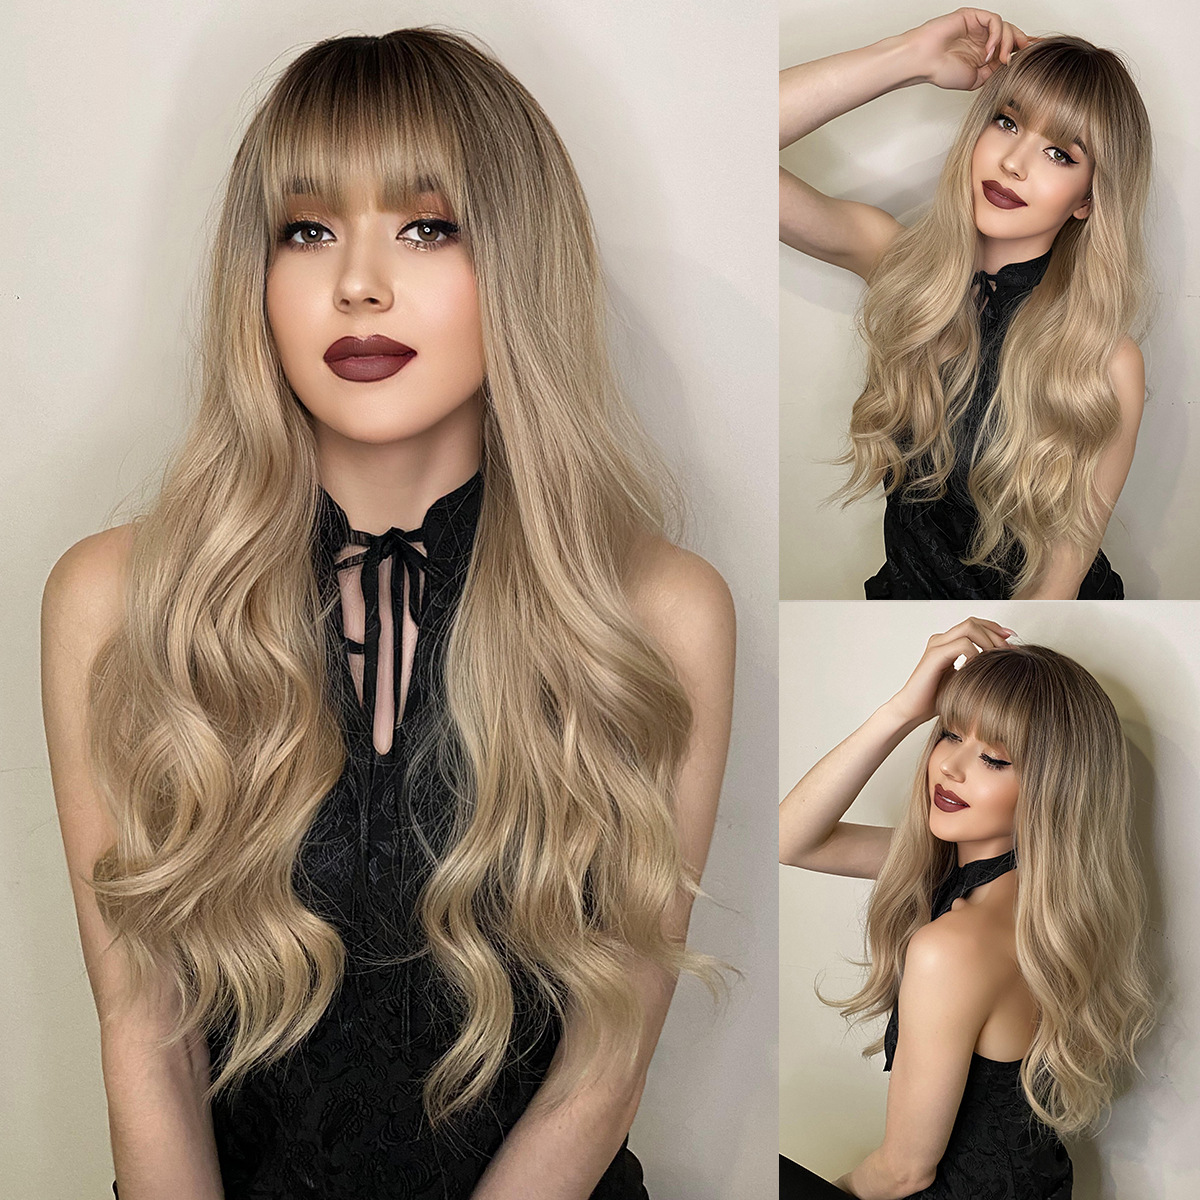 Radiate style with this ready-to-go large wavy synthetic wig, showcasing eye-catching multicolored highlights